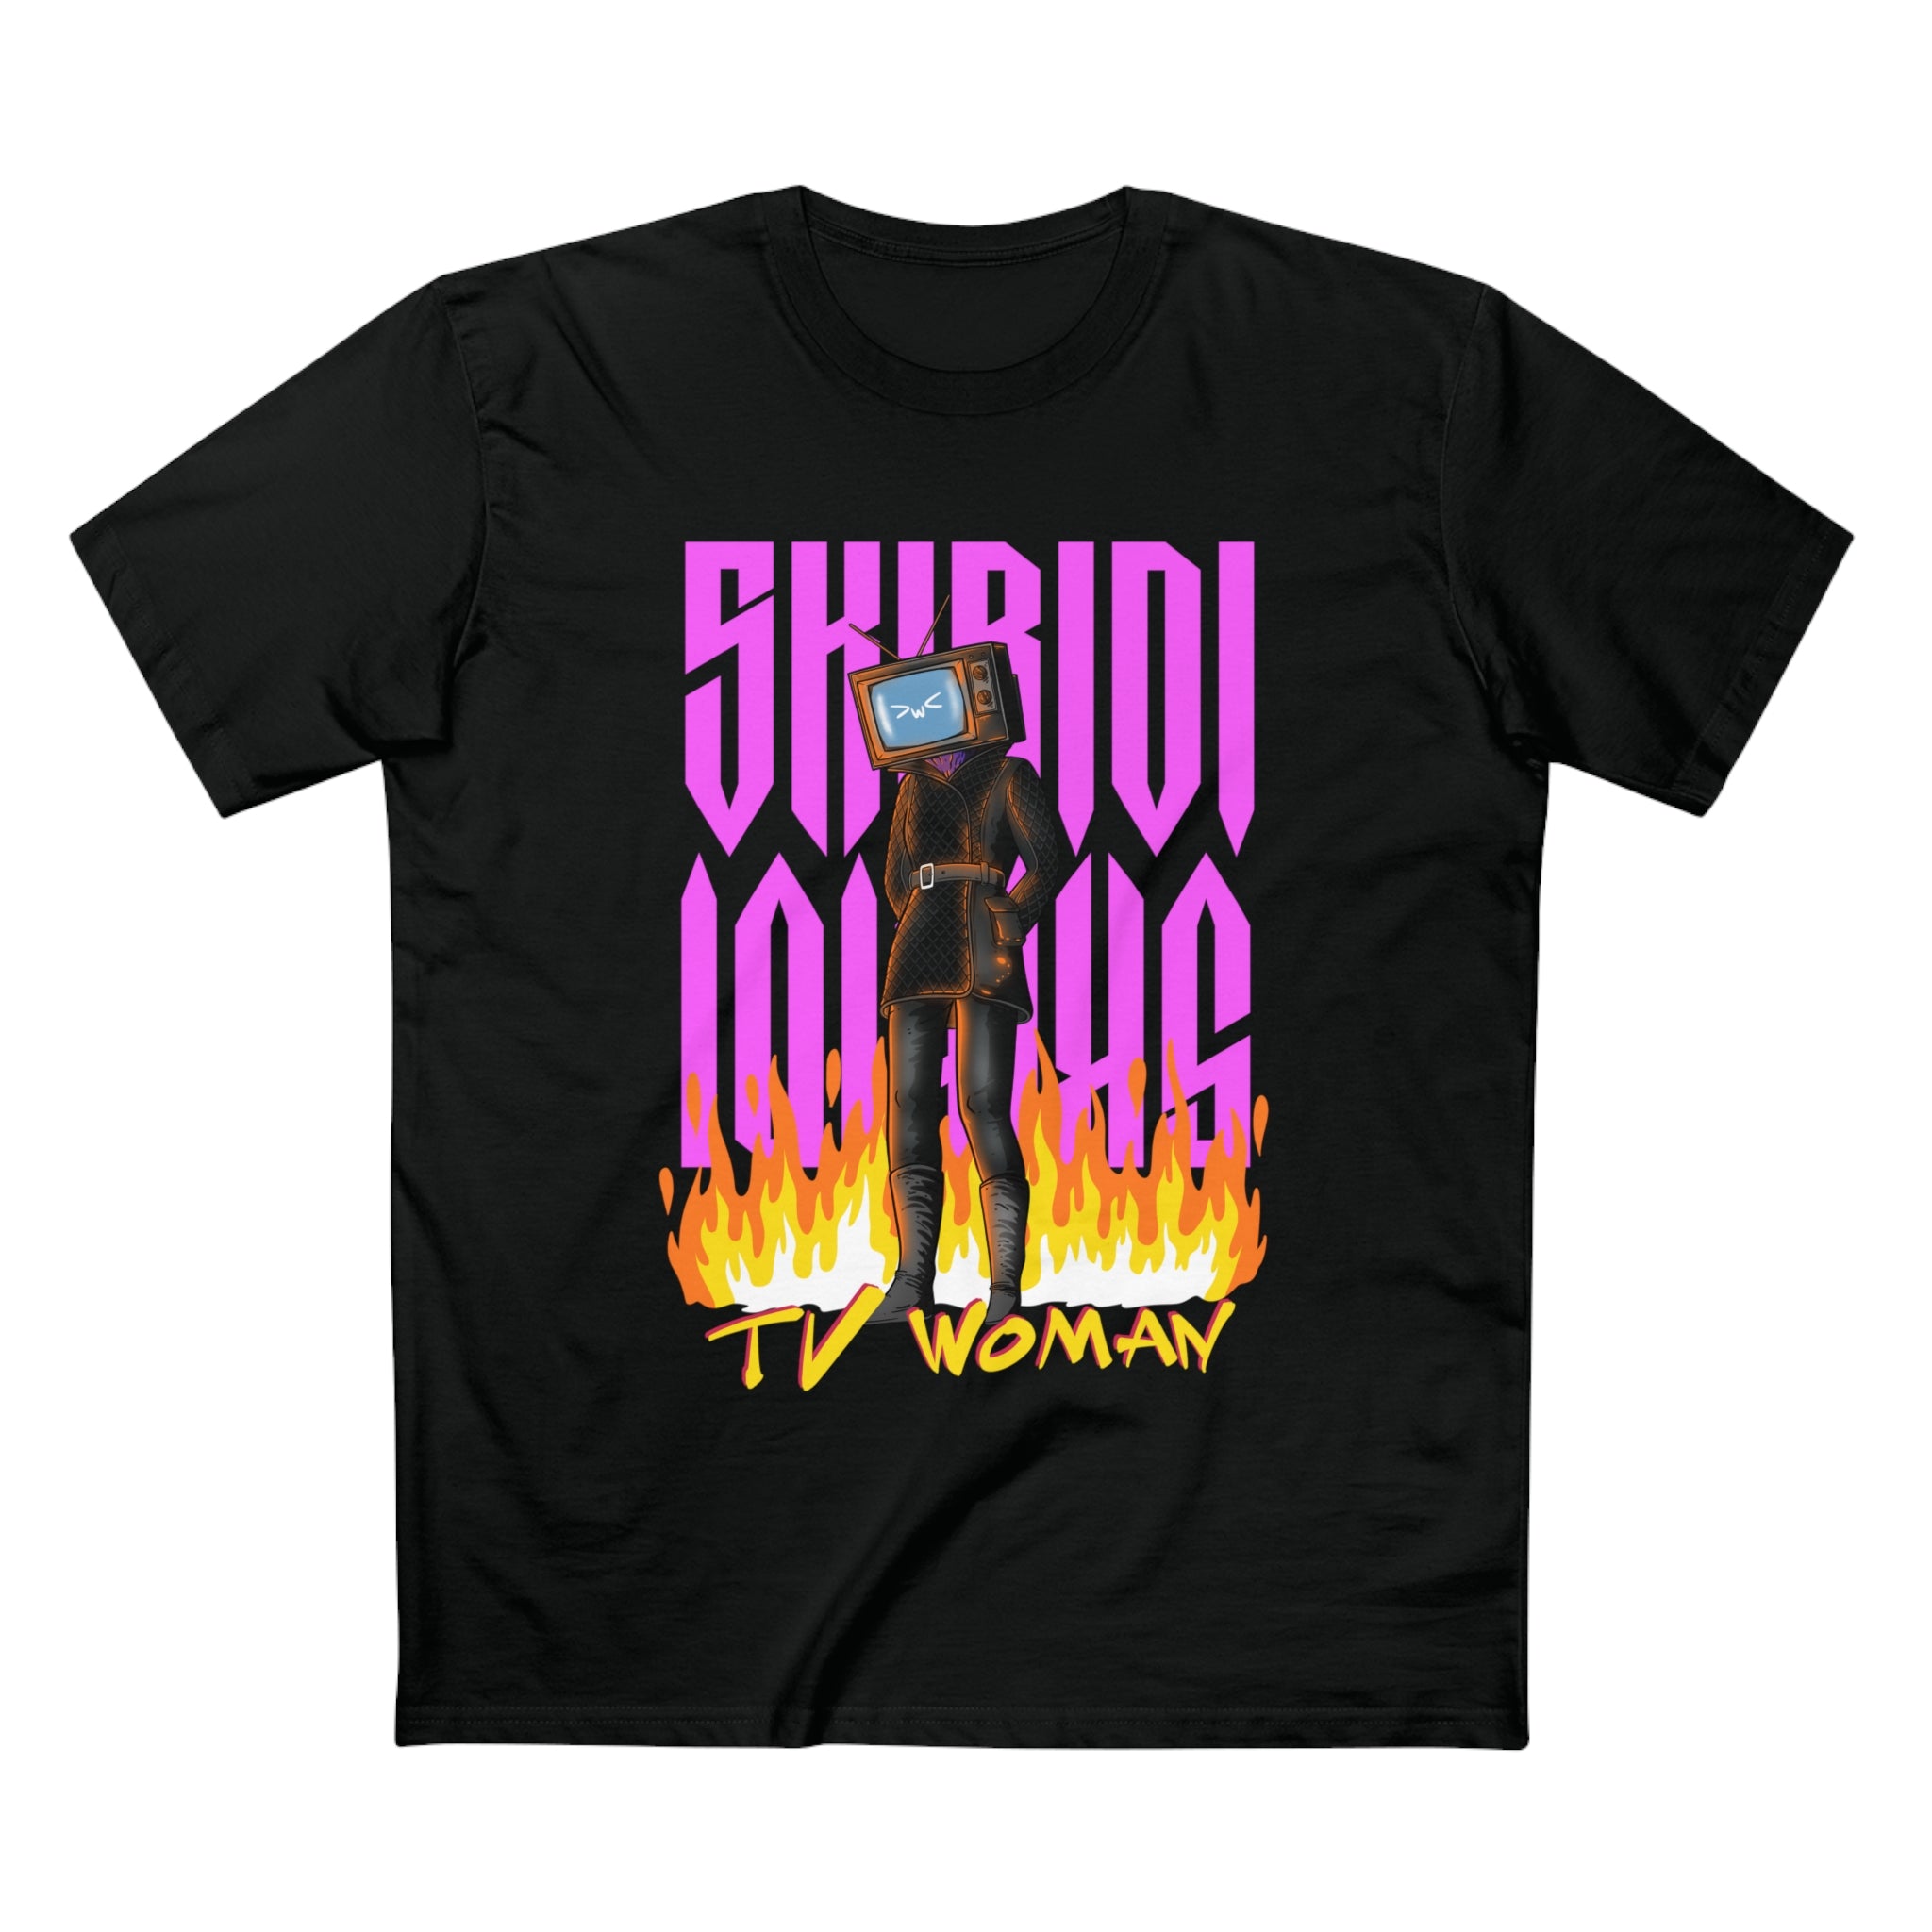 Black adult tee with fiery TV Woman illustration from Skibidi